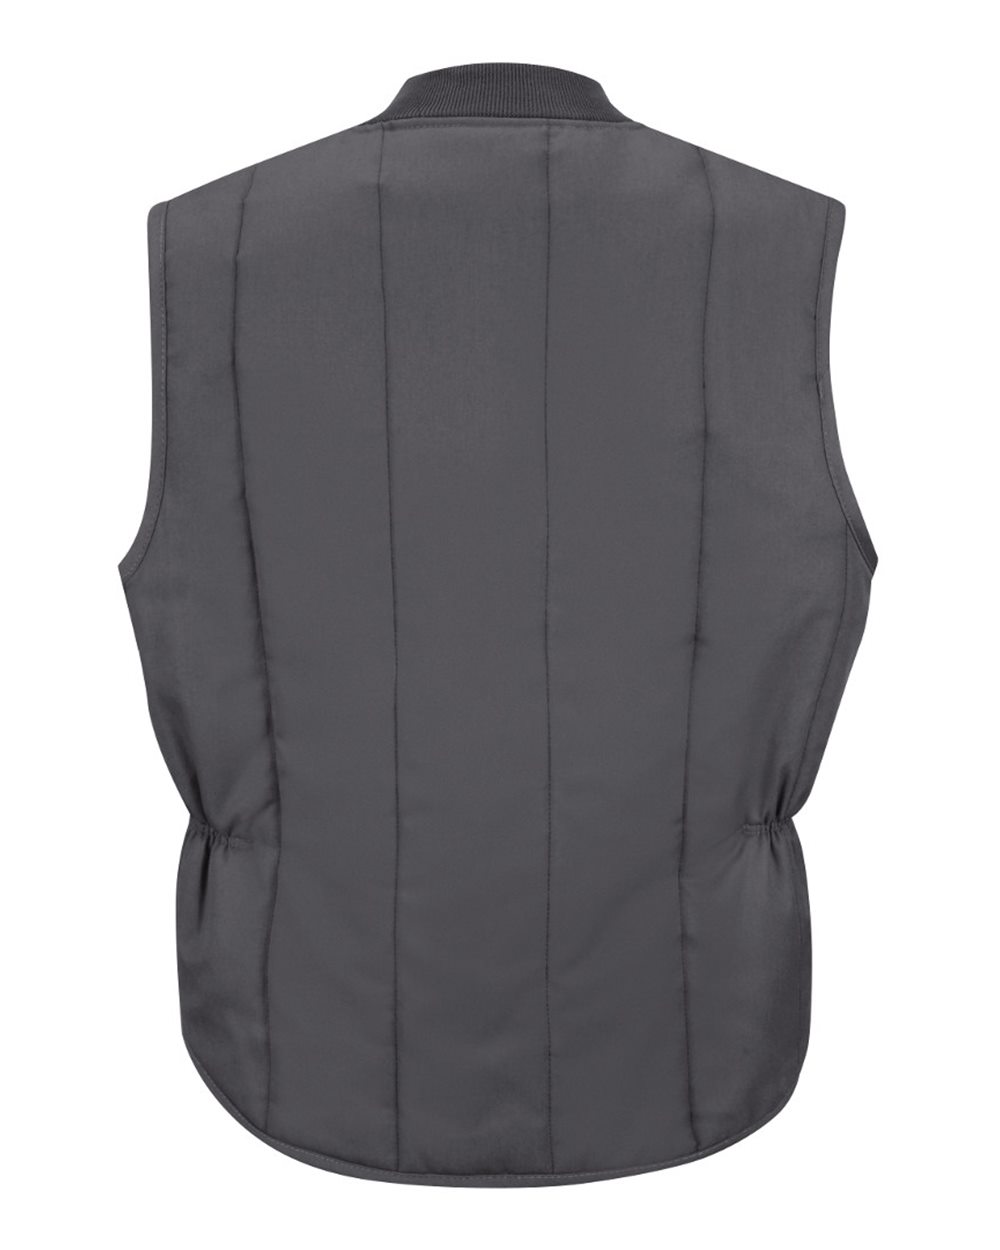 Red Kap® Quilted Vest - image 4 of 4